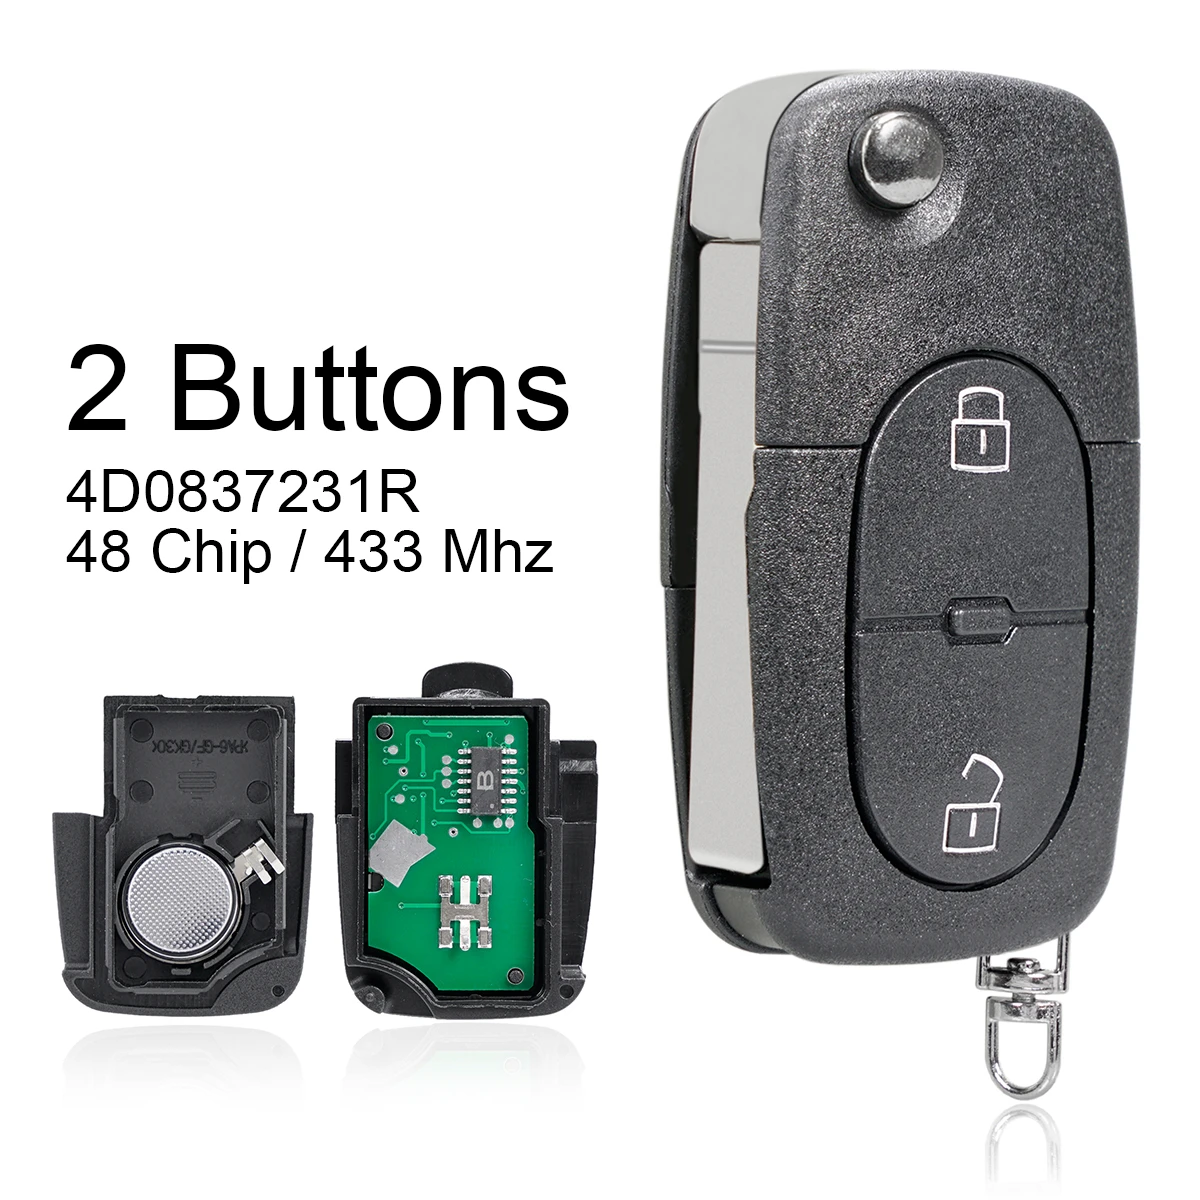 433Mhz 2Buttons Car Remote key with ID48 Chip / 4D0837231R Fit for Au-di A3 A4 A6 A8  B6 433mhz 3 button car remote key with id48 chip 8x0837220d 8x0837220 for audi a1 q3 s1 2010 2011 2012 2013 2014 2015 2016 2017